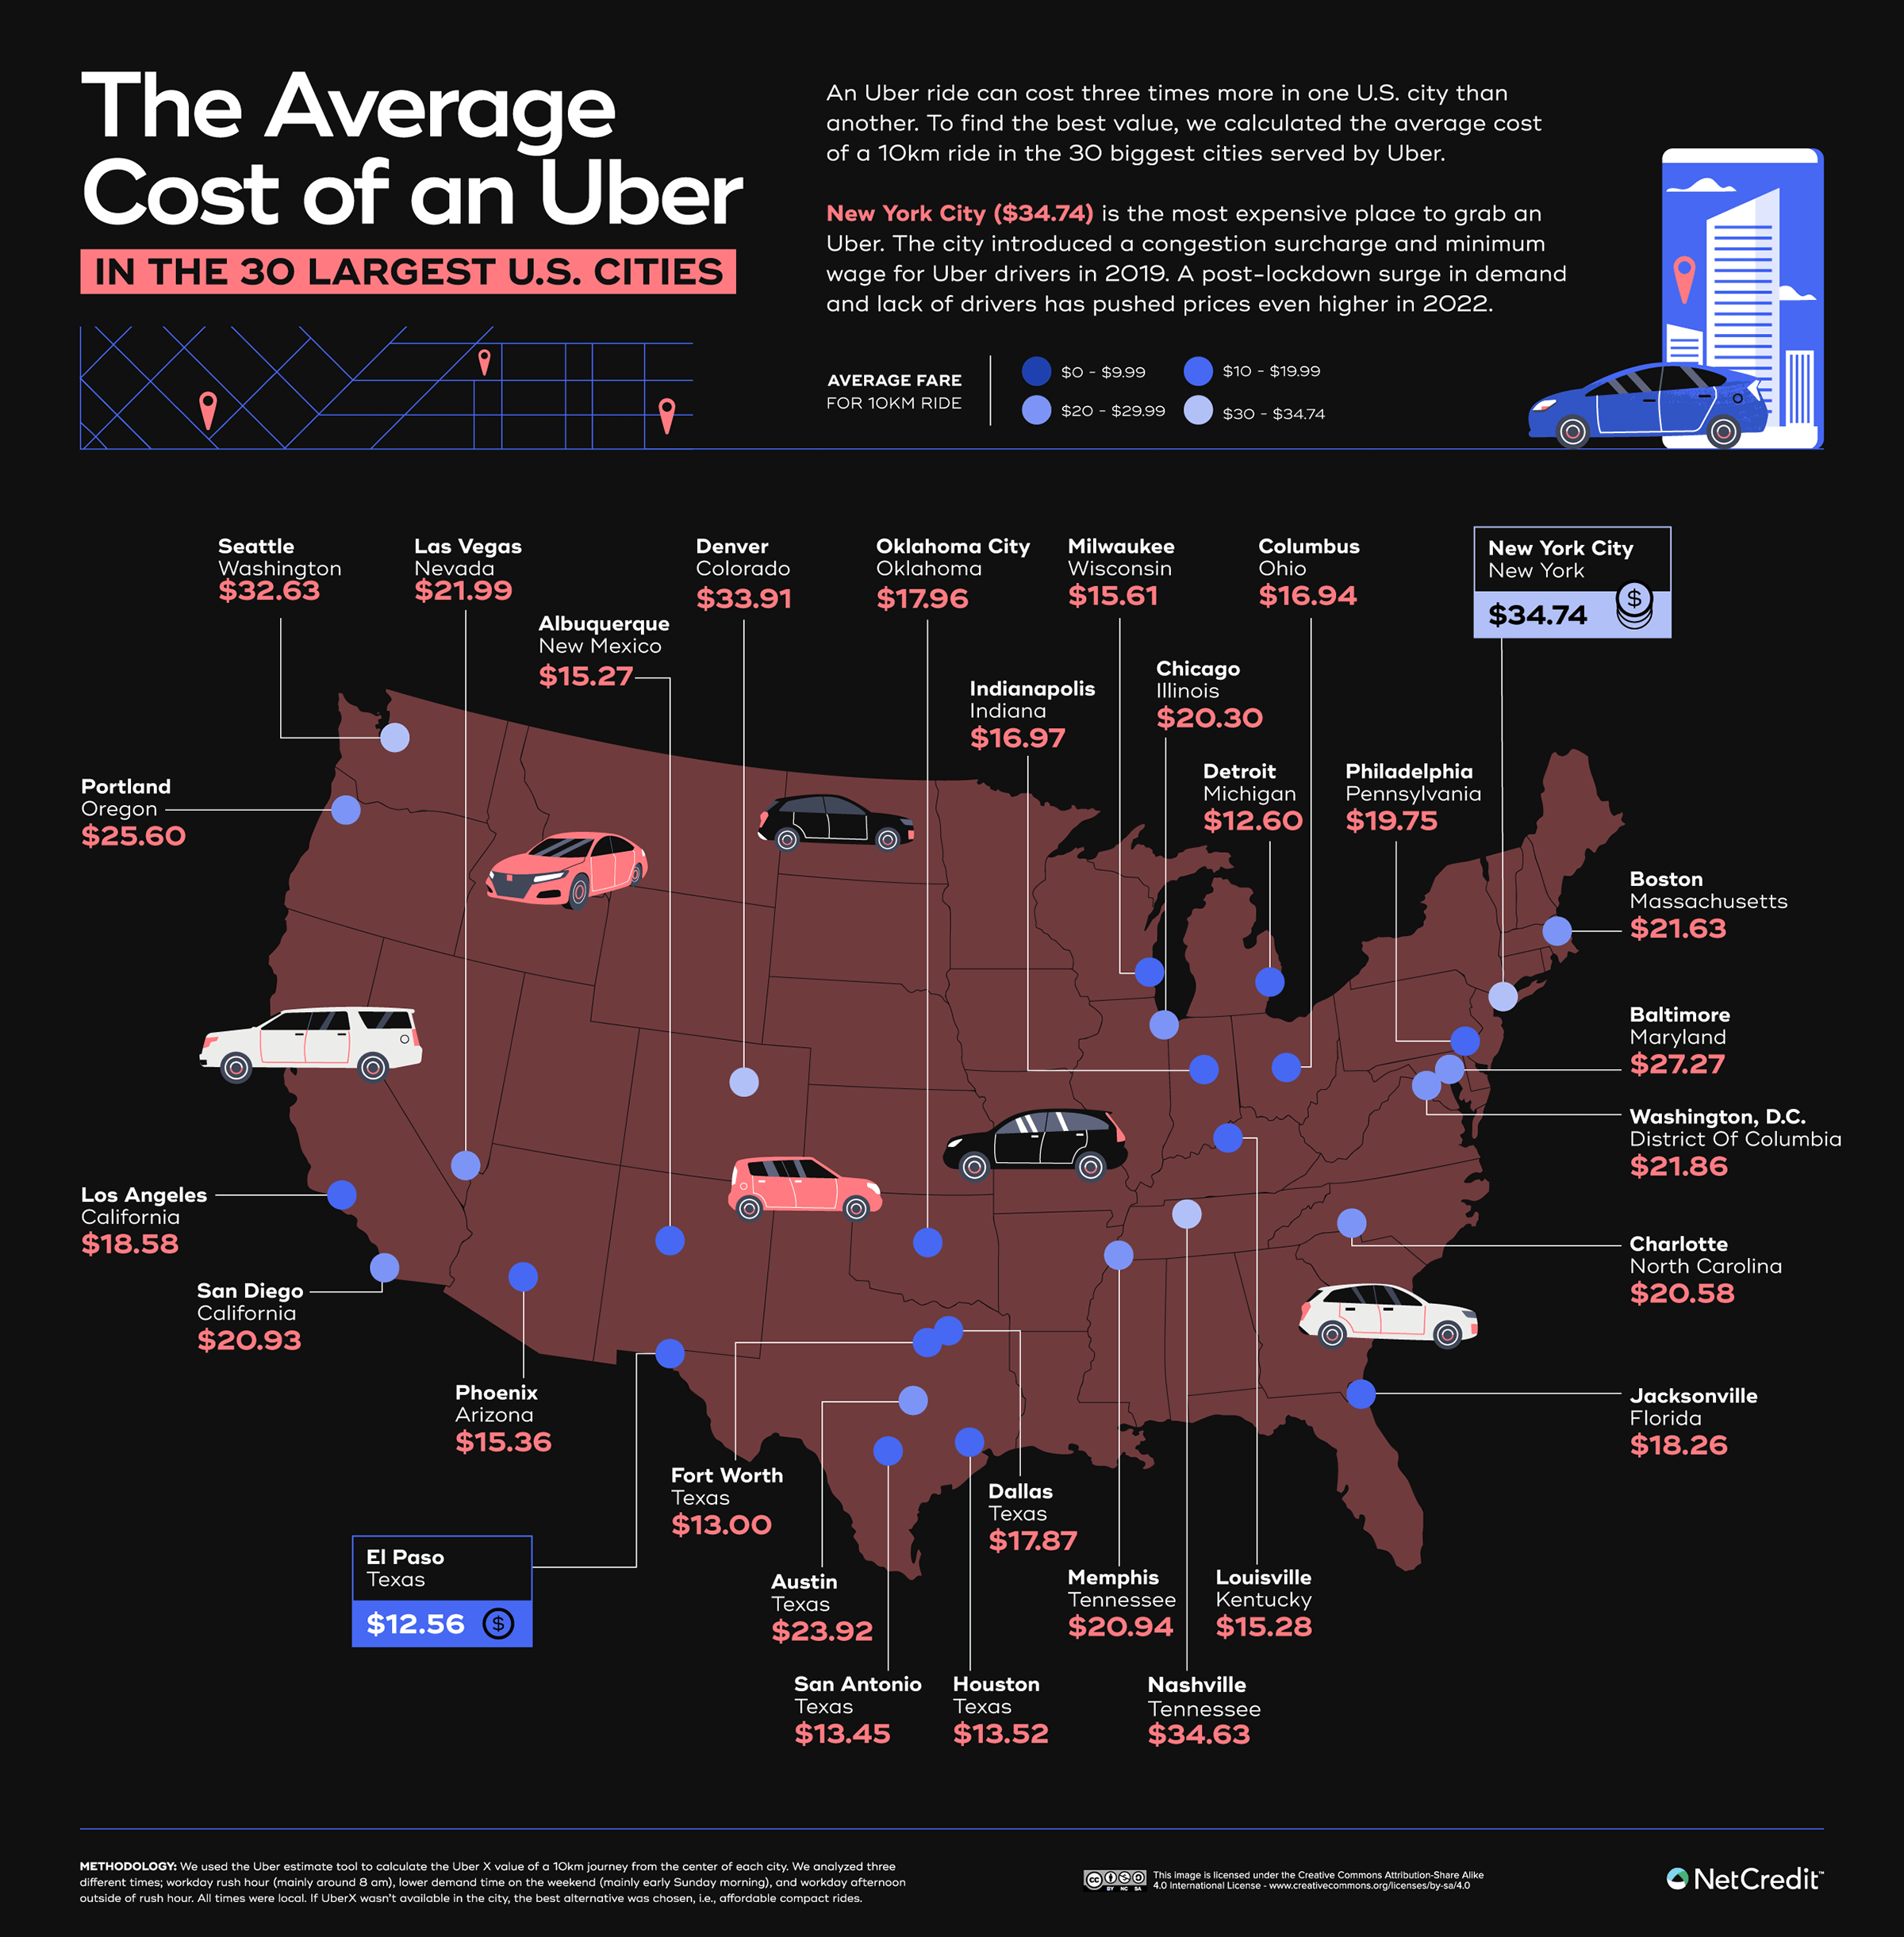 Cost of an Uber: United States